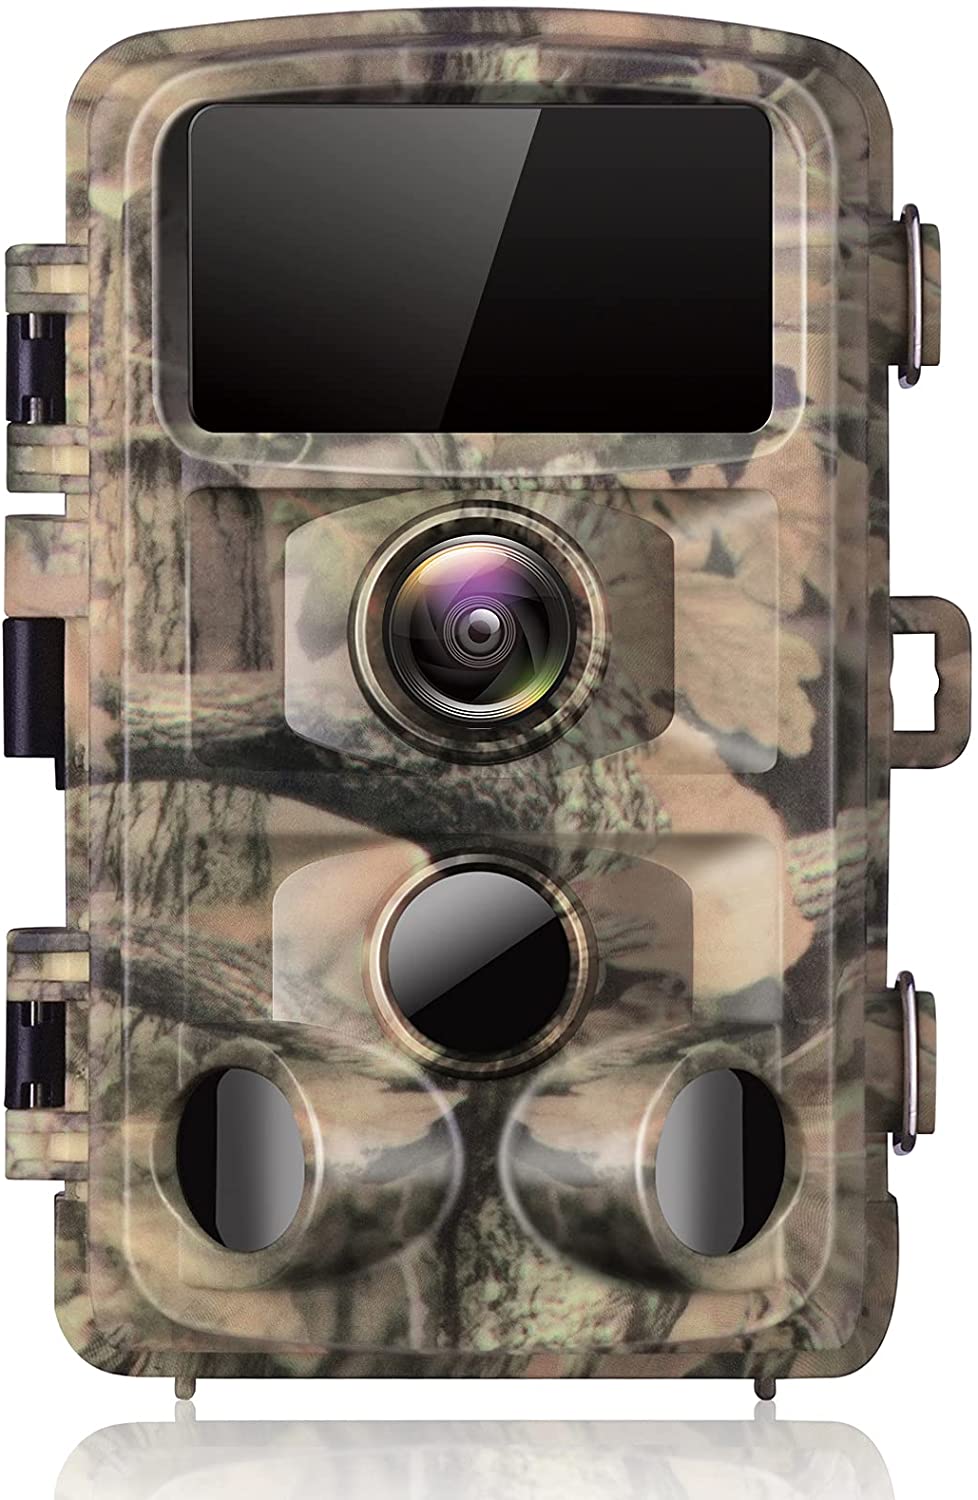 CAMPARK Trail Camera 1080P Game Deer Hunting Camera Infrared 42pcs 850nm IR Night Vision Waterproof 120° Wide Angle Motion Activated Trail Cam for Wildlife Monitoring 2.4" LCD